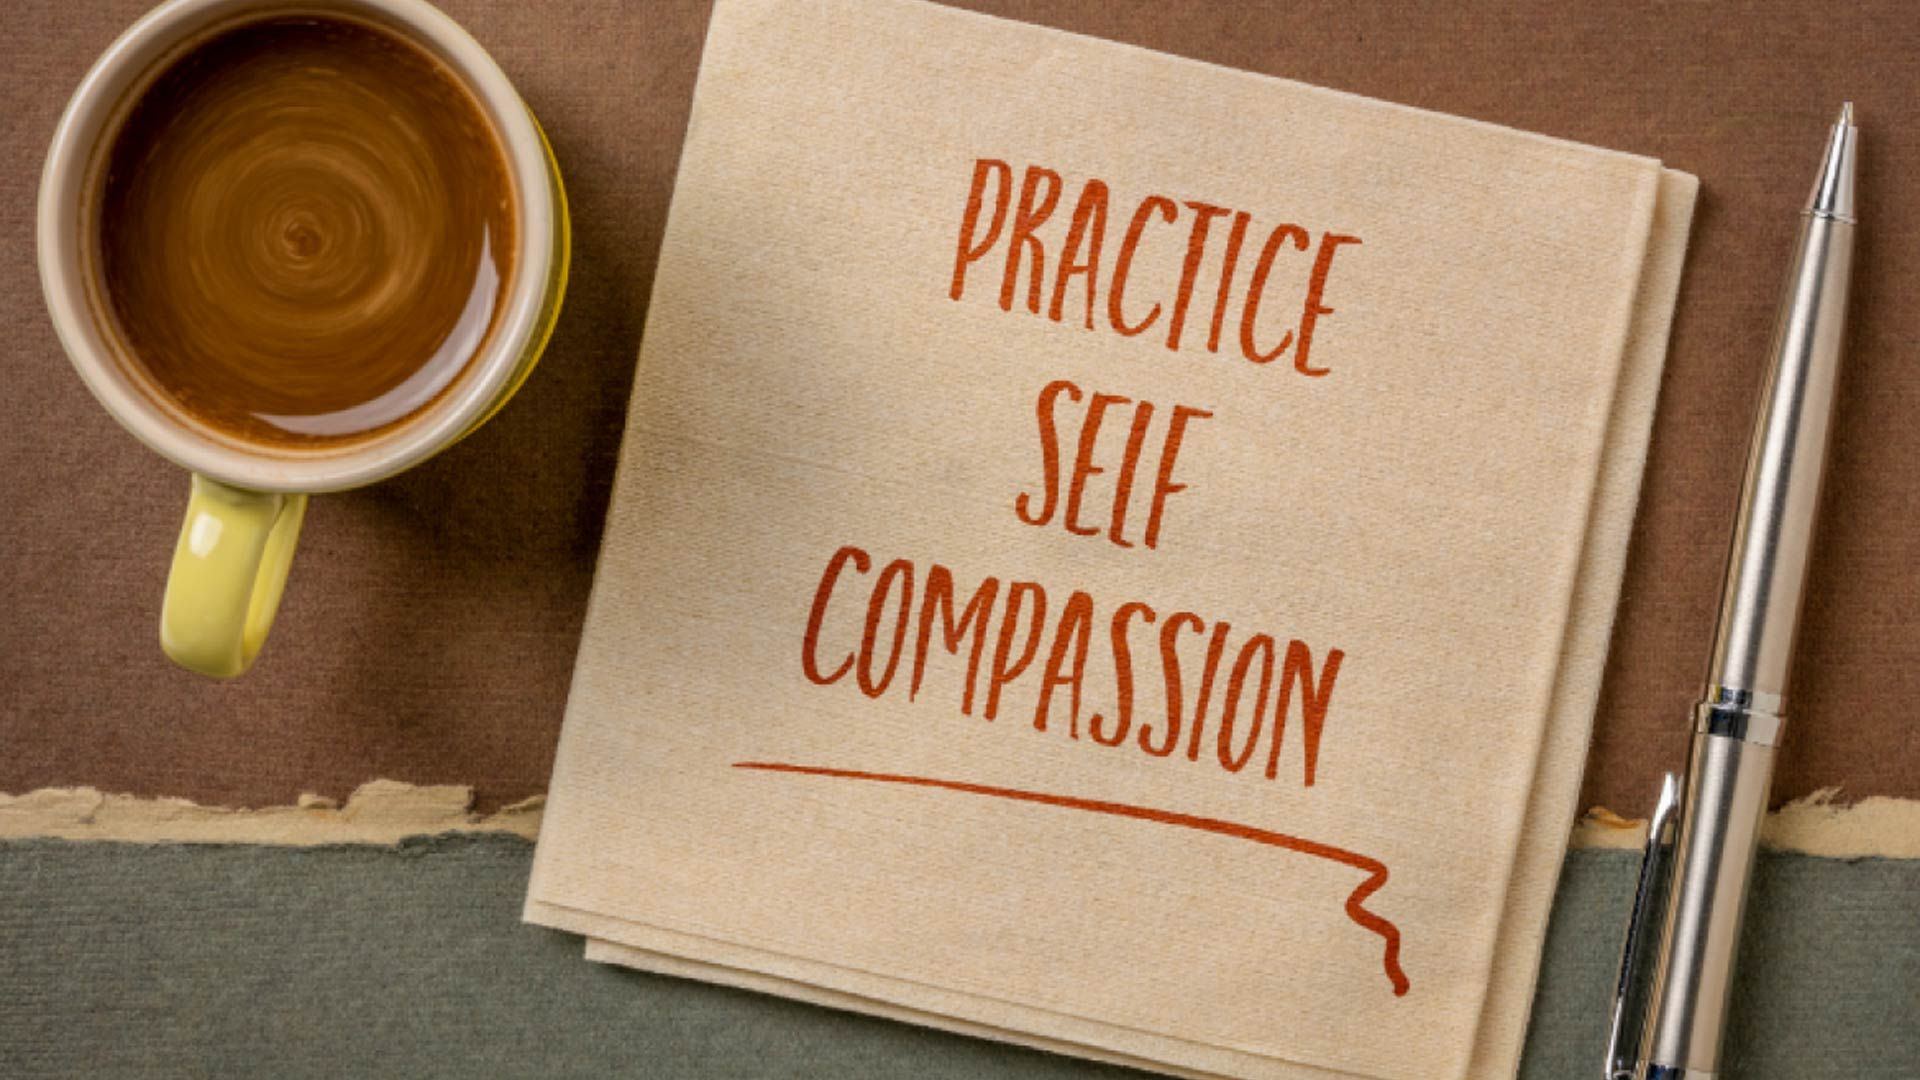 Transform Your Life: The Power of Practicing Self-Compassion